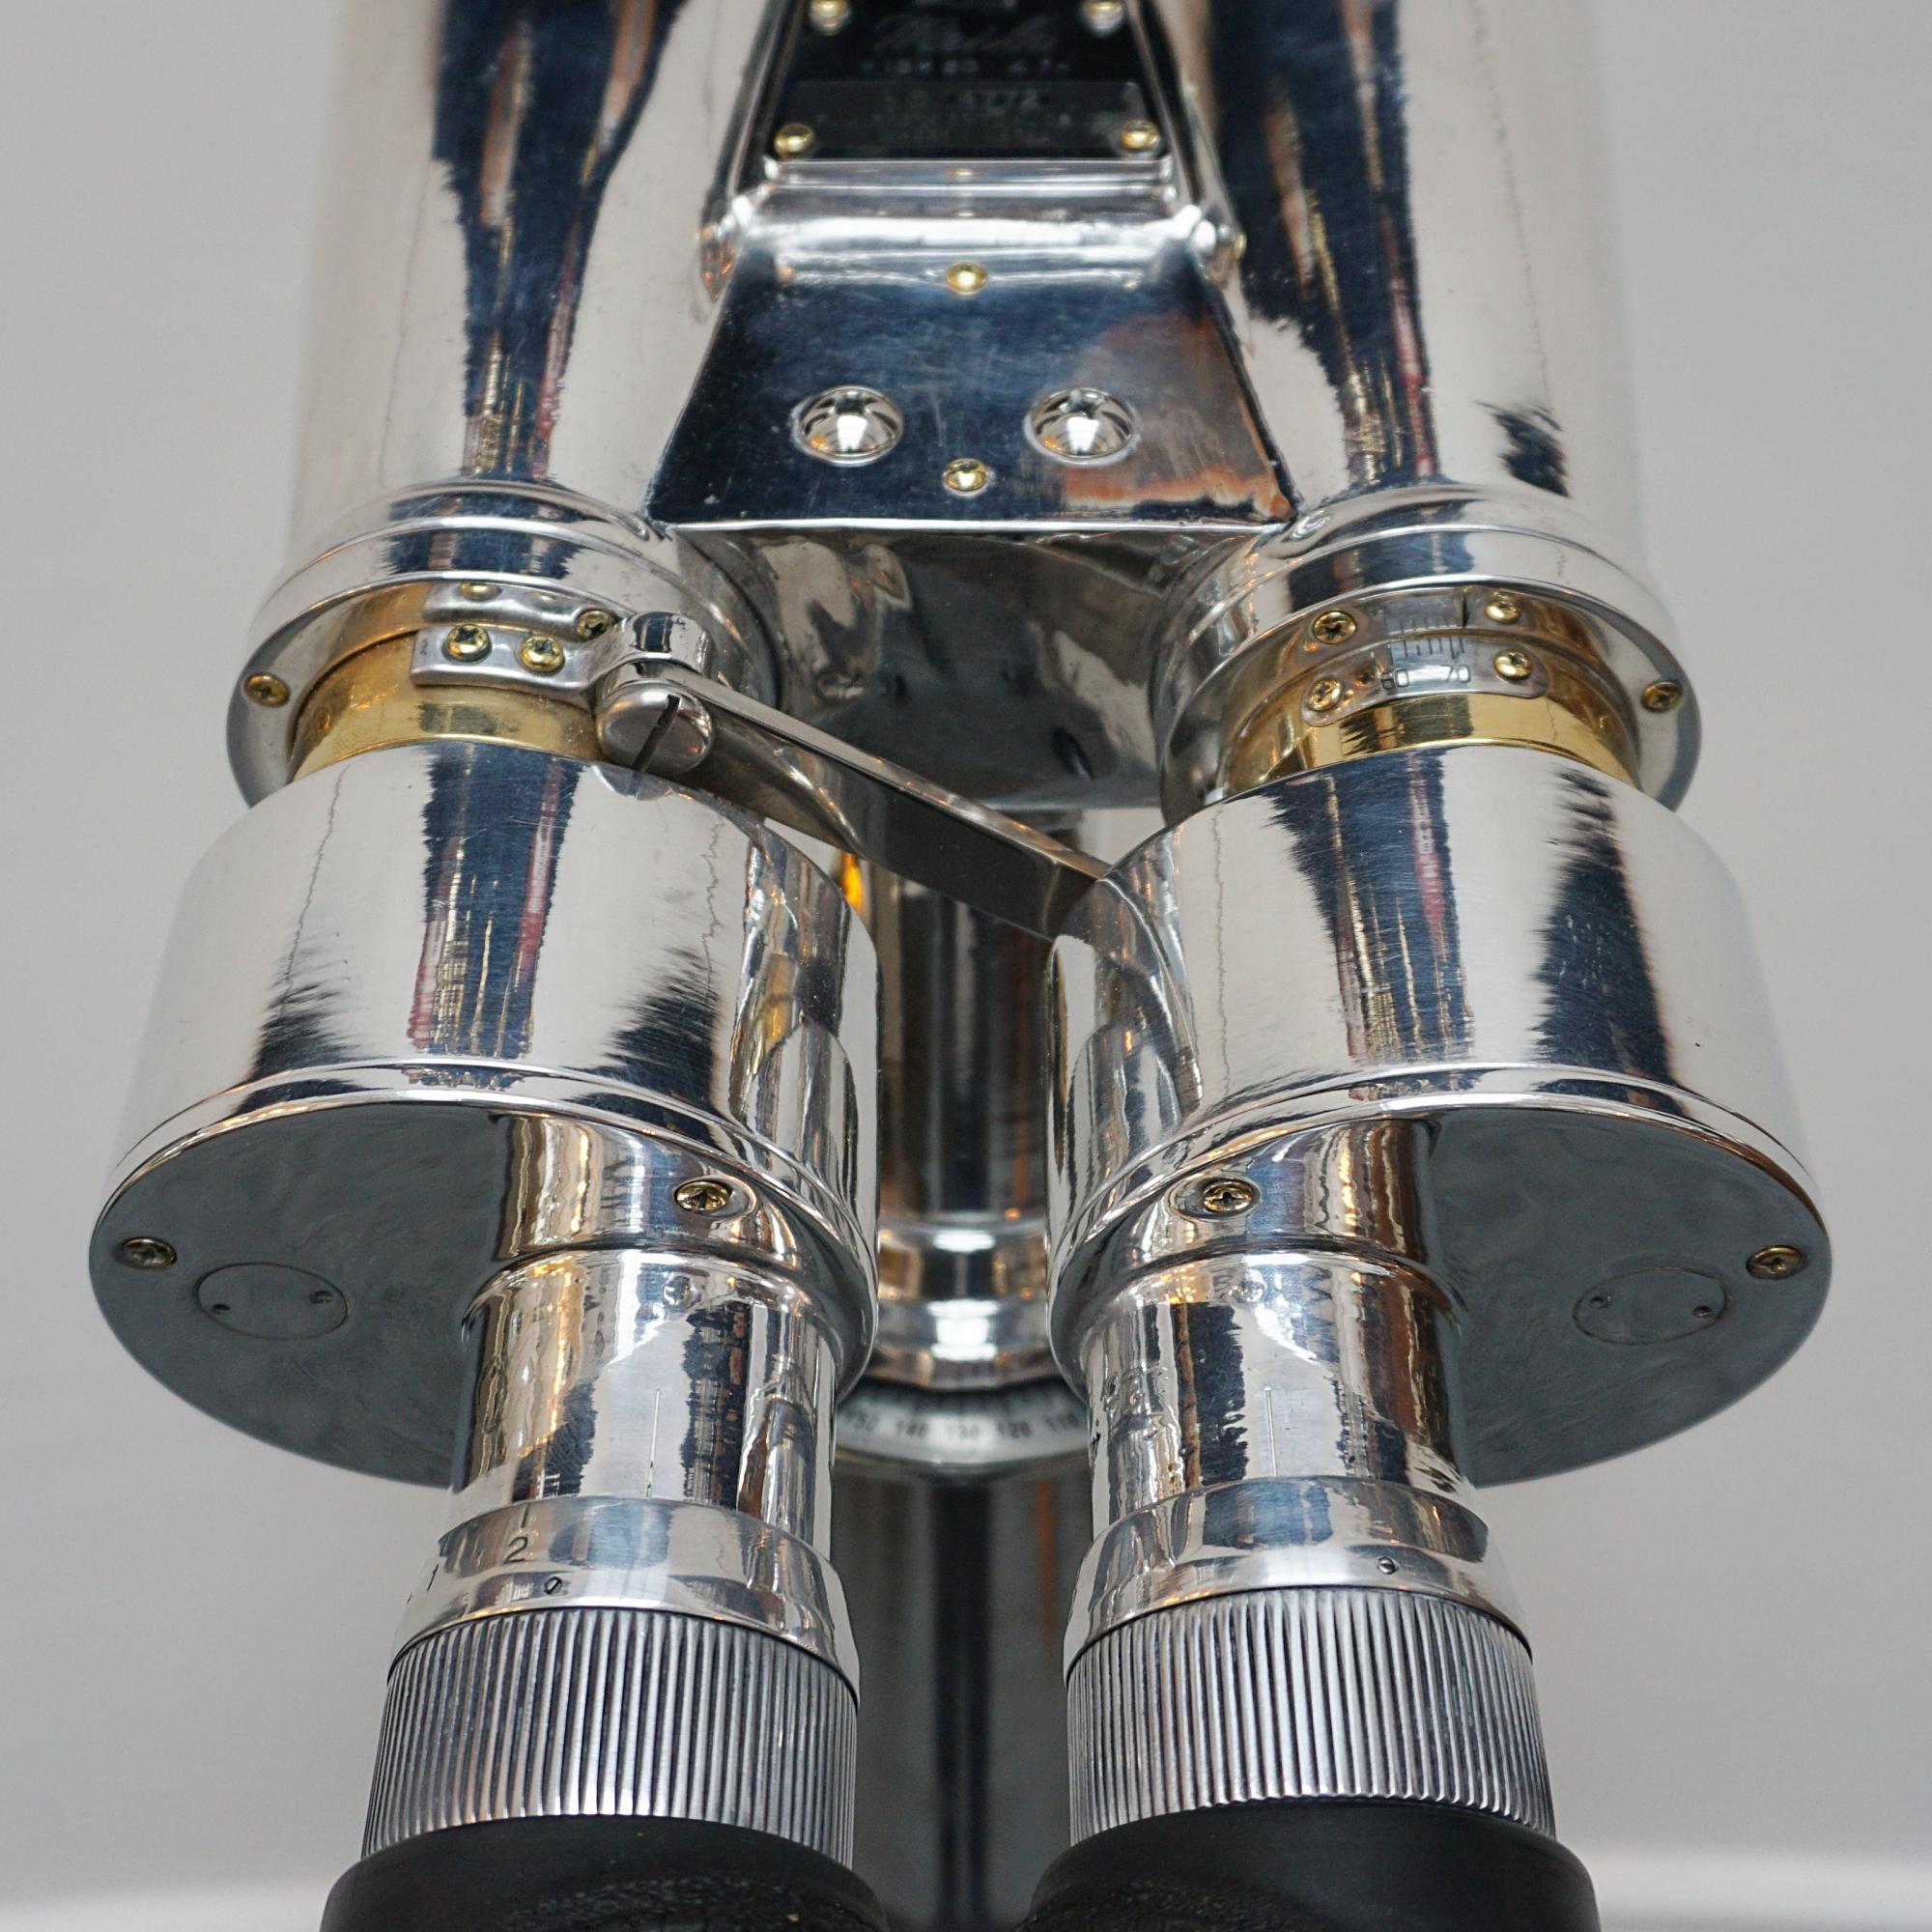 Fuji Meibo 15X80 marine binoculars on later extending wood and chromed metal stand with chromed conical feet. 15X magnification with 80m objective lens. 

Stamped Fuji Meibo and numbered. 

Dimensions: H 50cm W 21cm Length 50cm Stand H 100cm - 180cm